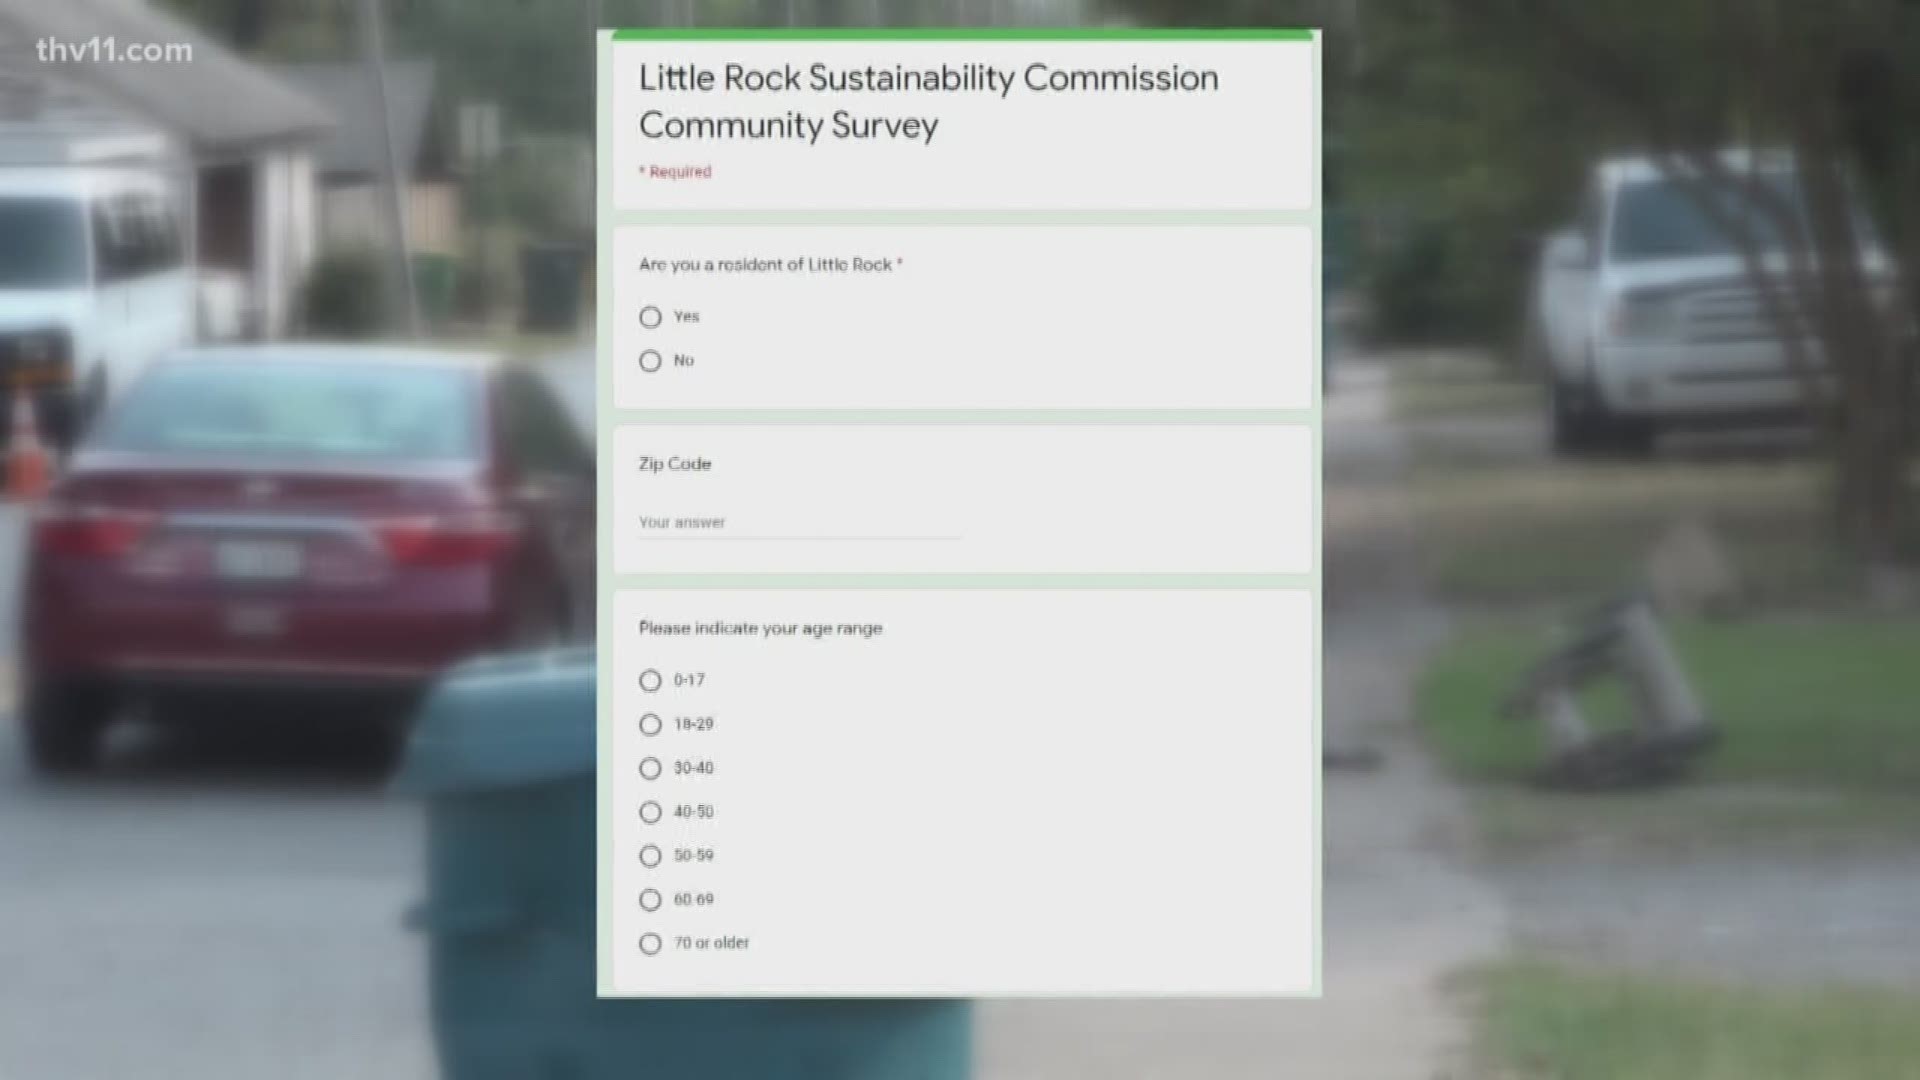 A new survey is taking a look at how to make Little Rock more sustainable in the next 10 years. The city is already looking into new programs thanks to the input.